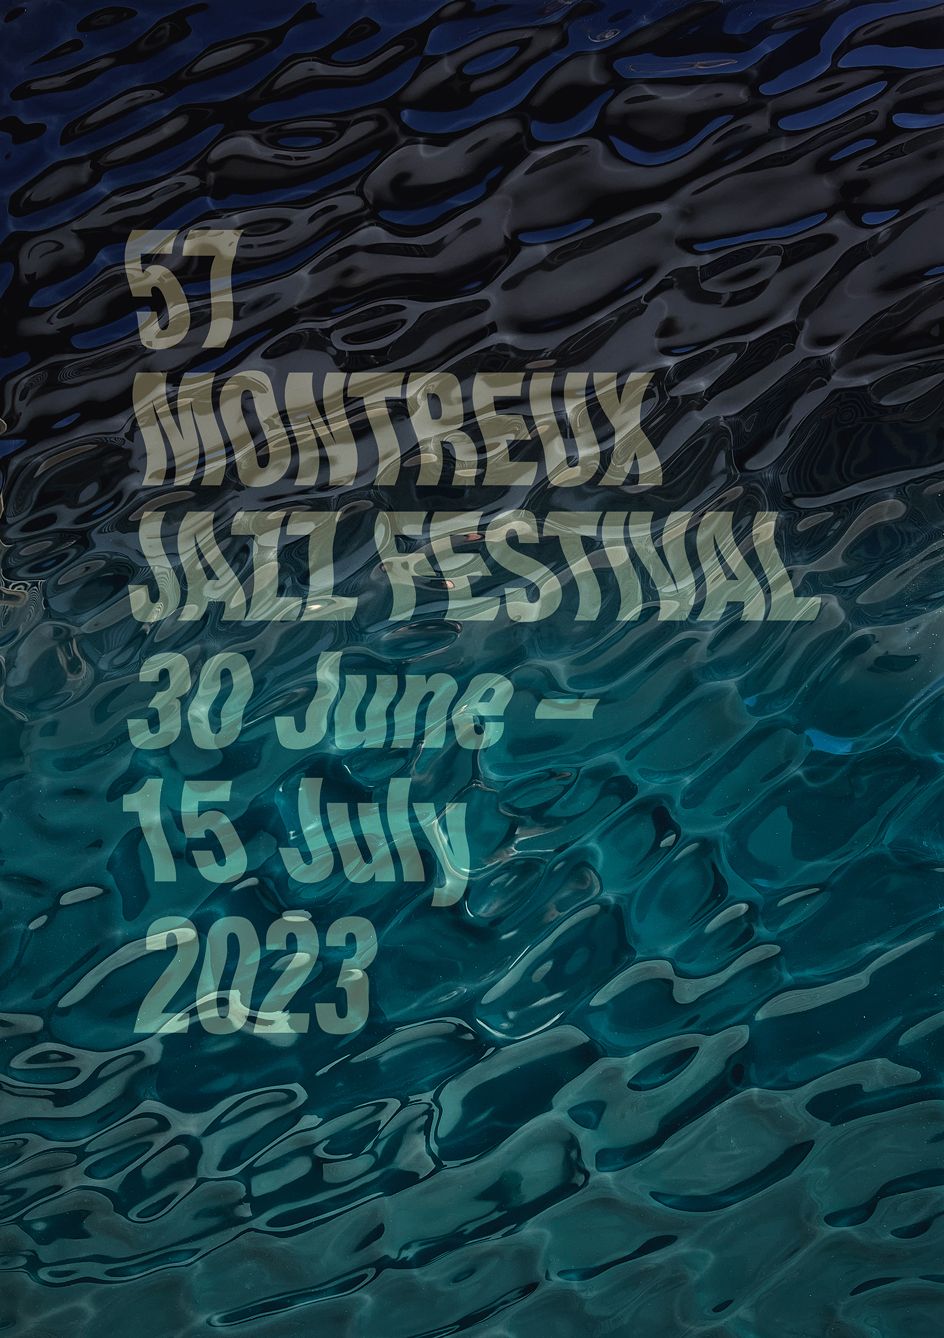 Montreux Jazz Festival posters a visual history Wallpaper